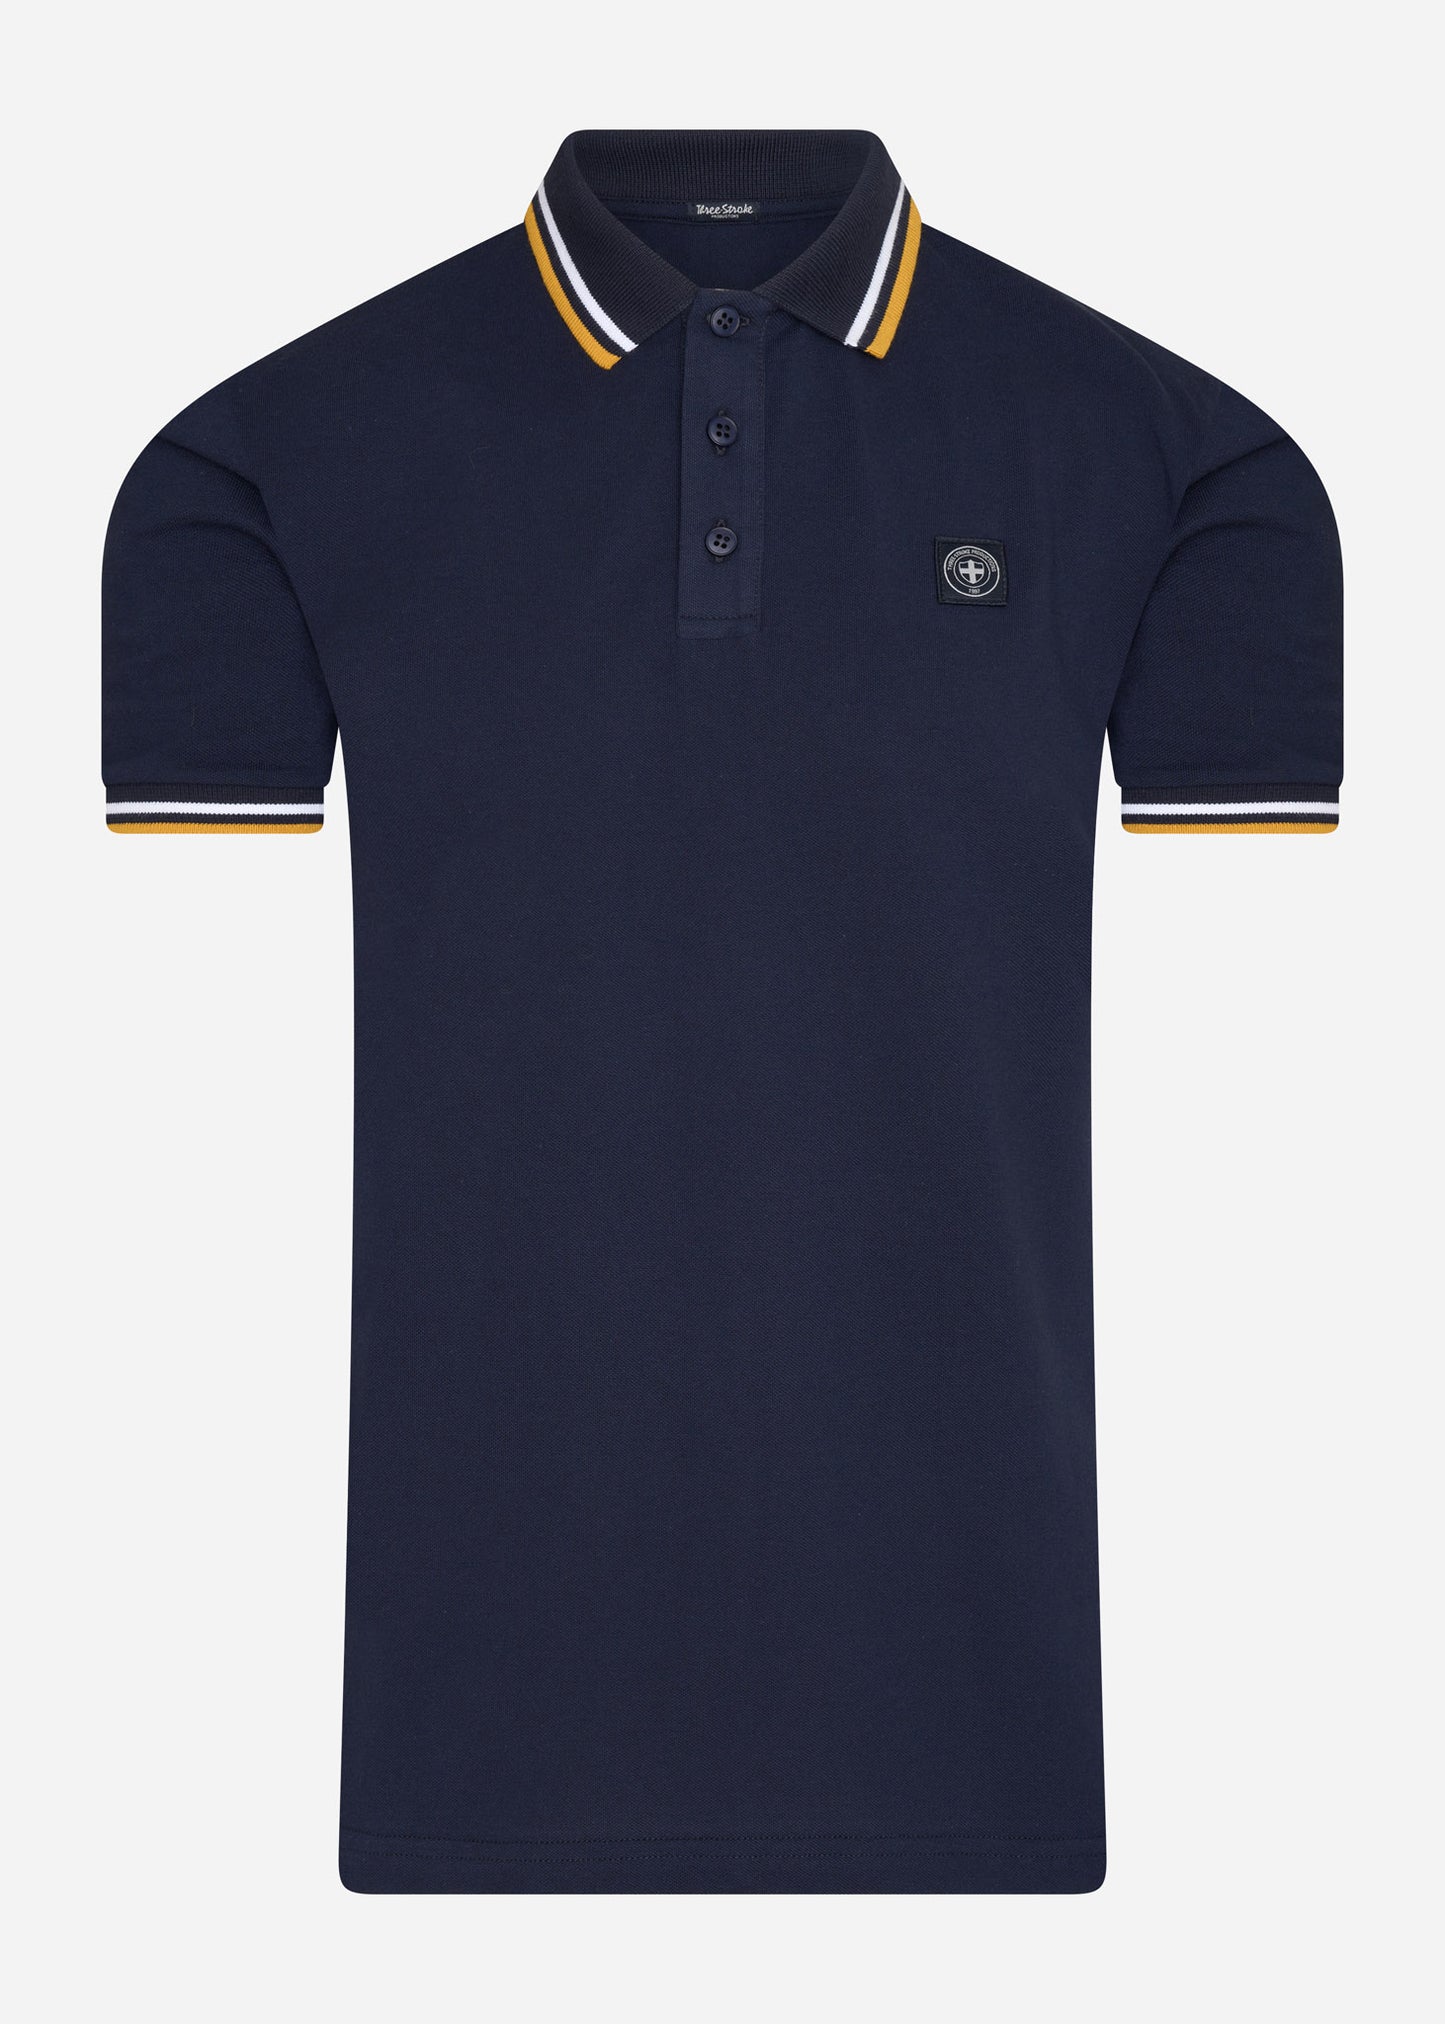 The classic - navy polo